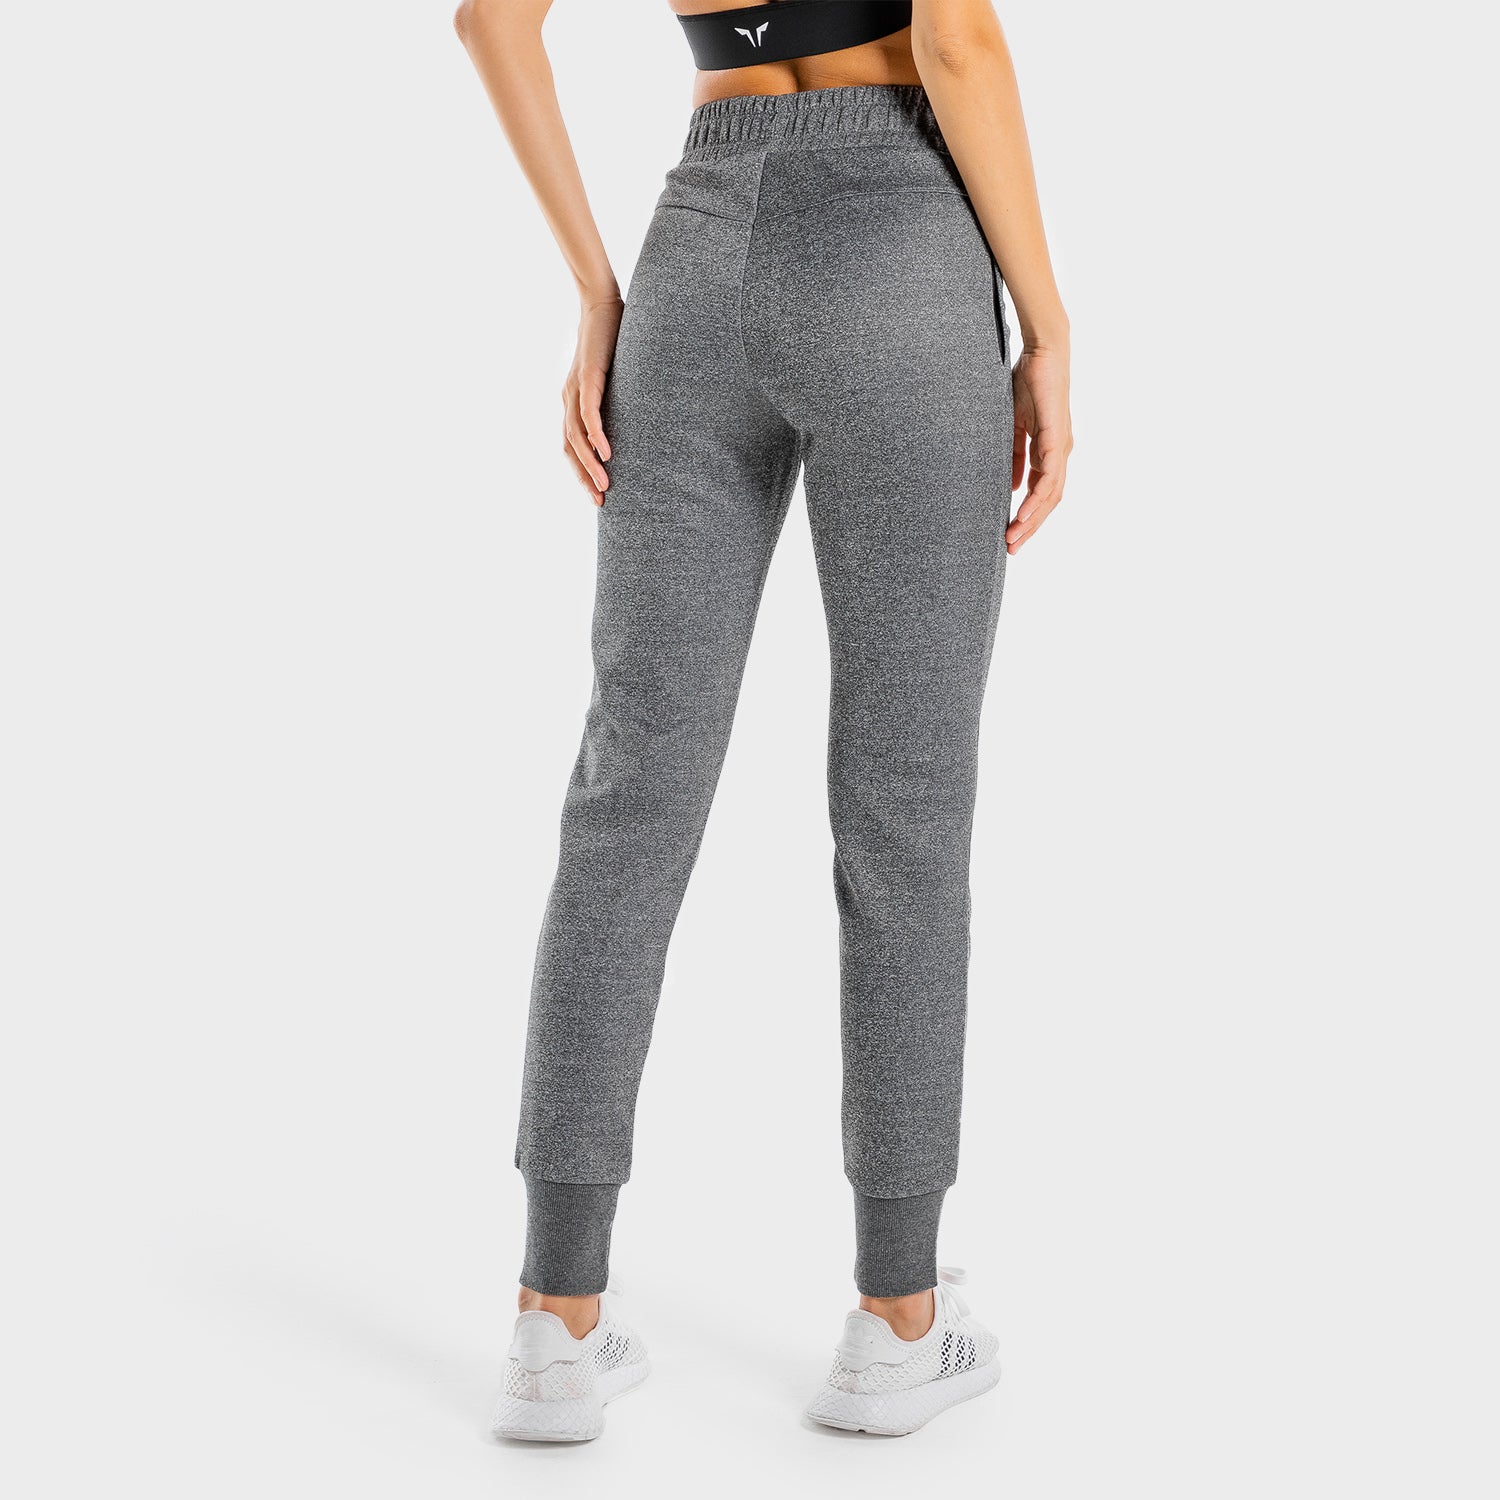 She-Wolf Do-Knot-Joggers - Teal | Workout Pants Women | SQUATWOLF